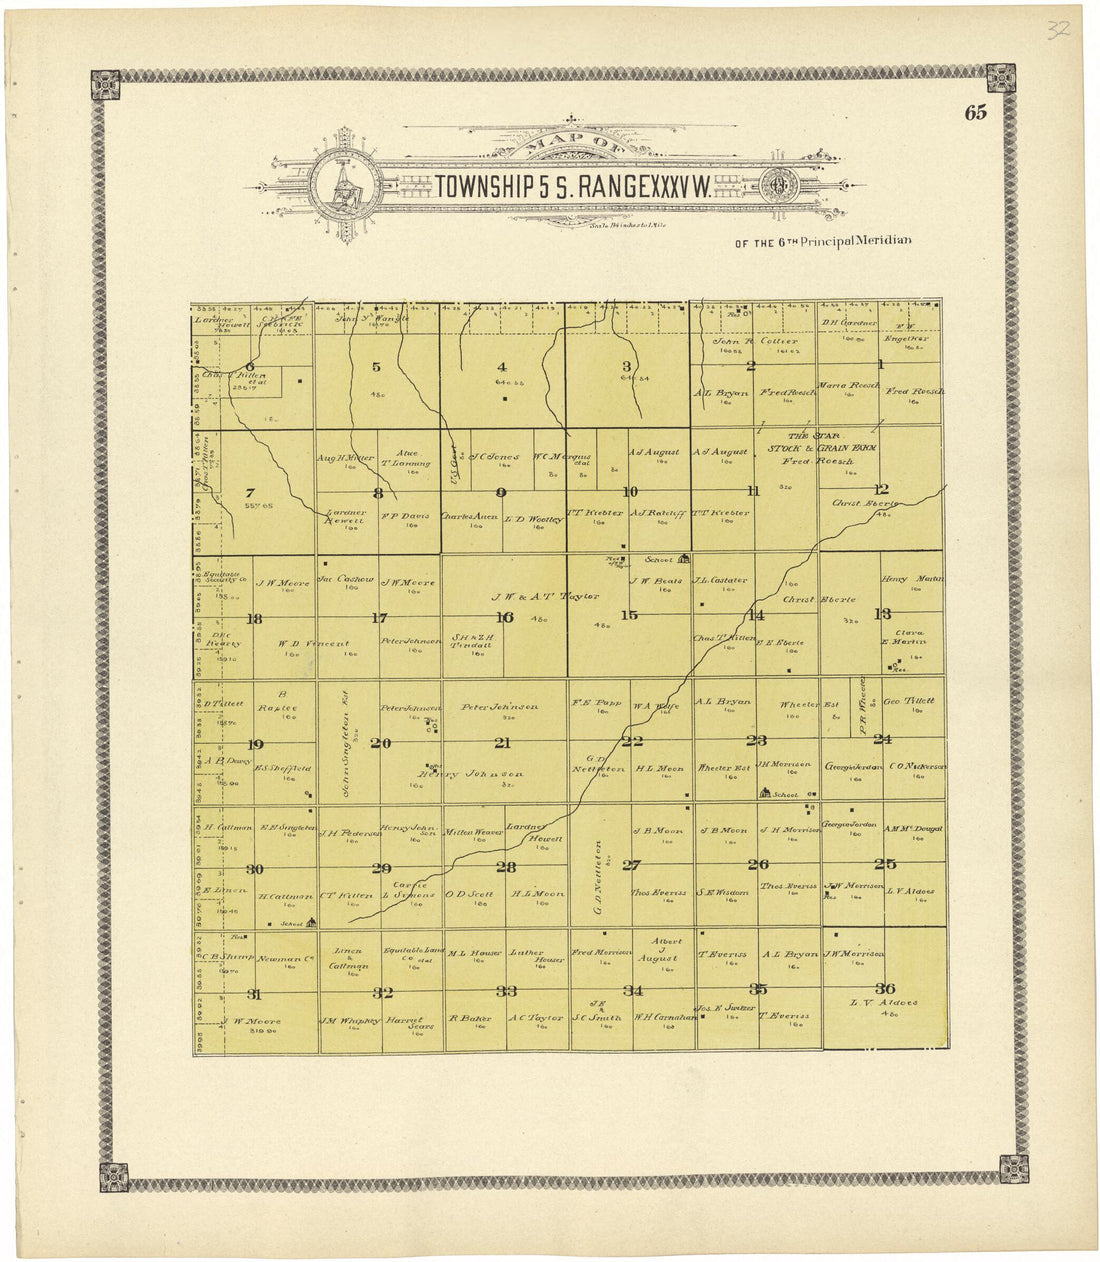 This old map of Map of Township 5 S. Range XXXV W. from Standard Atlas of Rawlins County, Kansas from 1906 was created by  Geo. A. Ogle &amp; Co in 1906